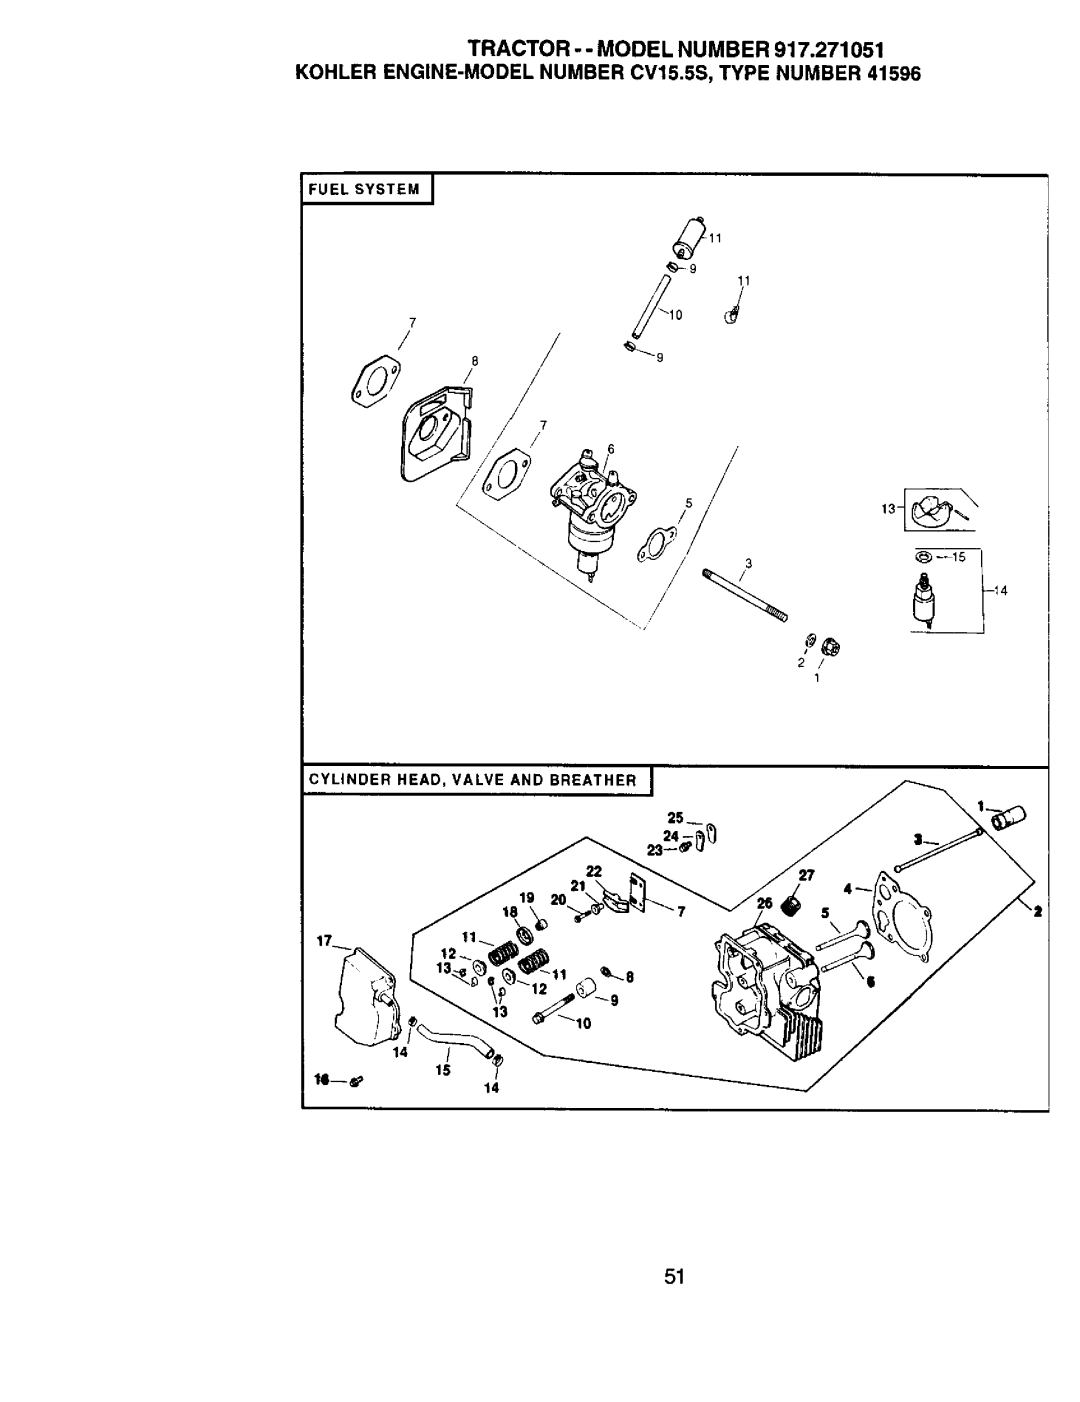 Sears 917.271051 owner manual FUEL SYSTEM 7, CYLINDER HEAD, VALVE AND BREATHER 25__ 